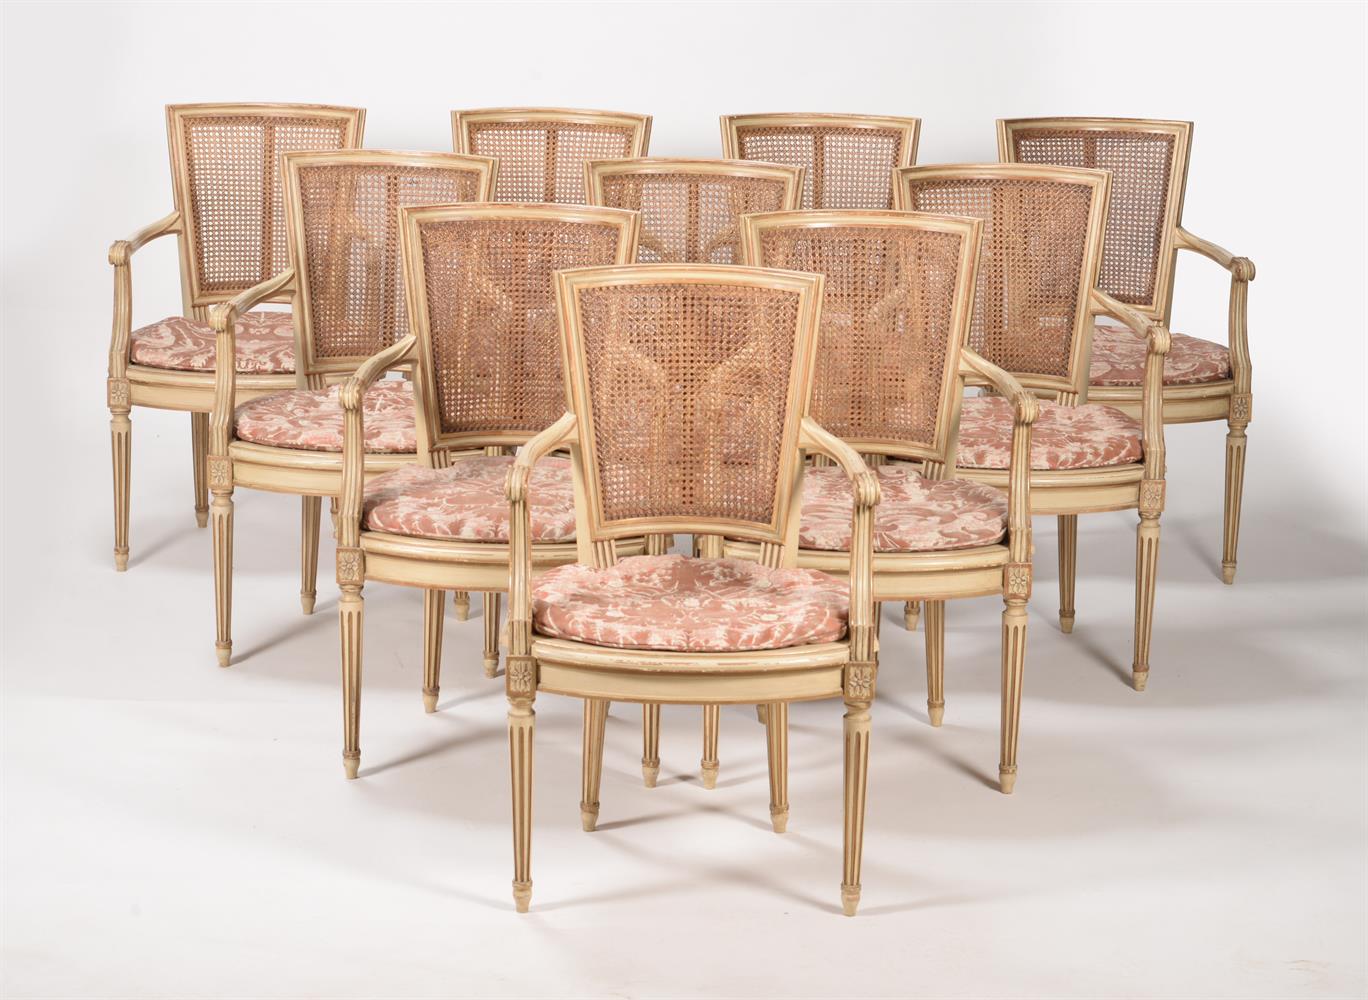 A SET OF TEN PAINTED WOOD DINING CHAIRS IN FRENCH TRANSITIONAL STYLE - Image 4 of 7